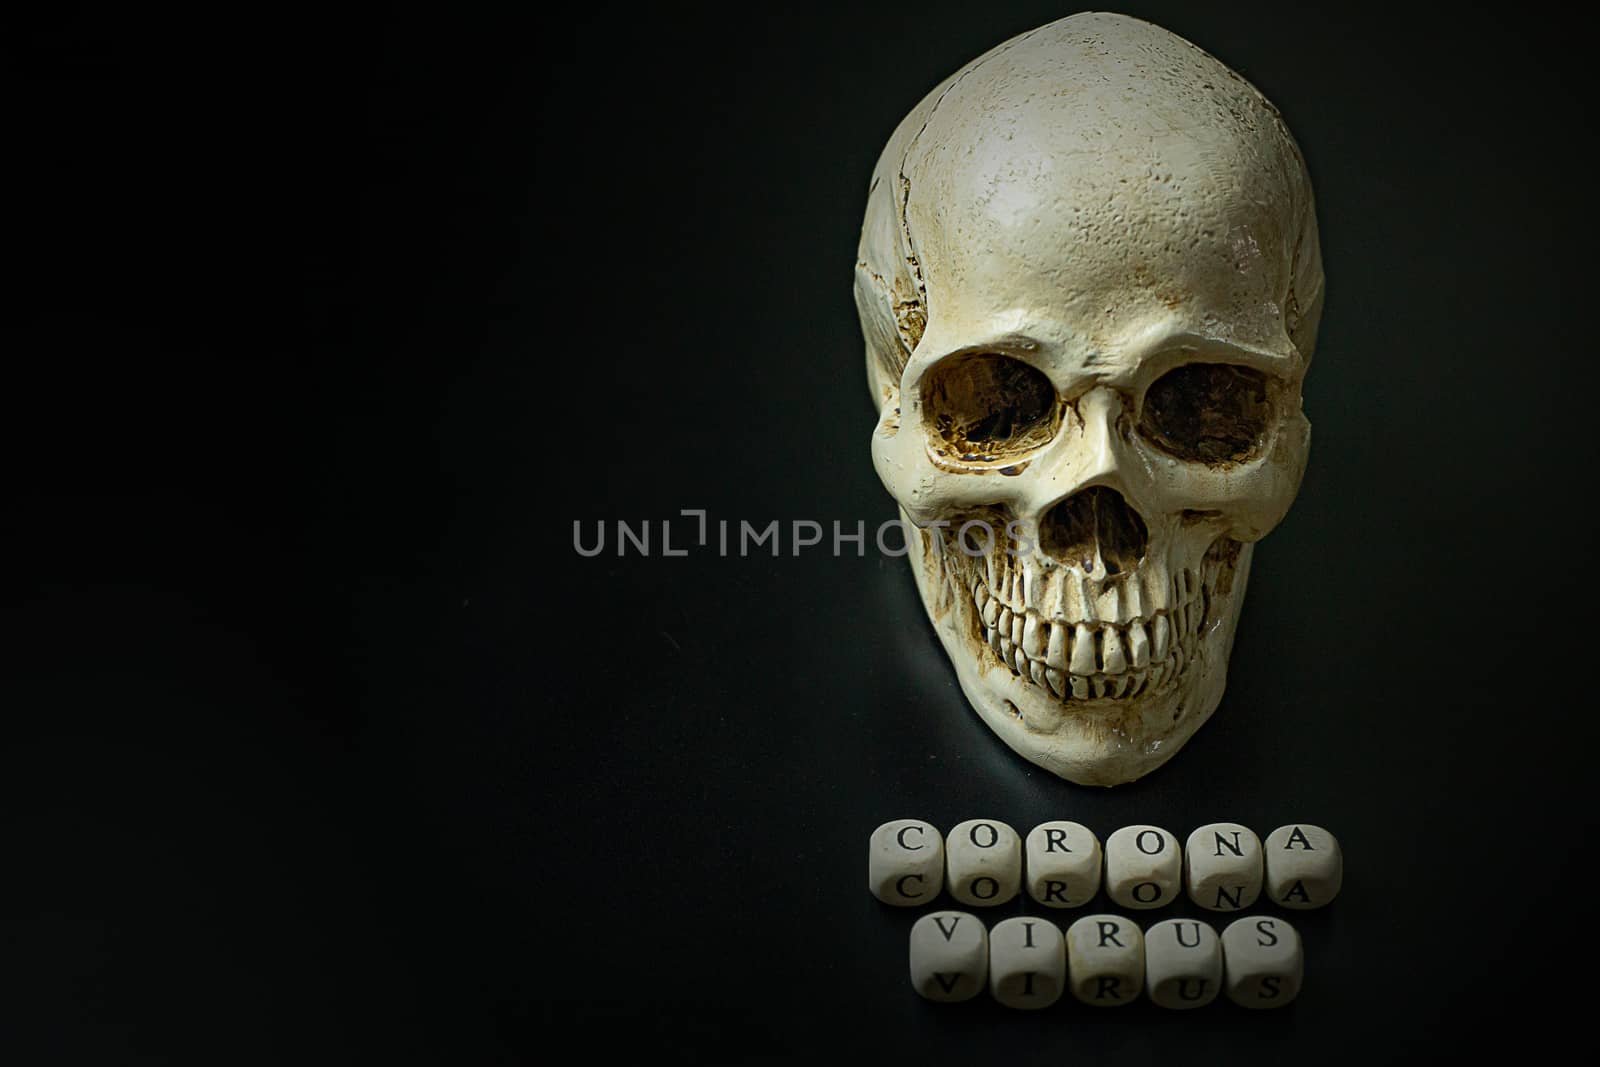 The corona virus  wooden cube and skull  on black background for medical content.